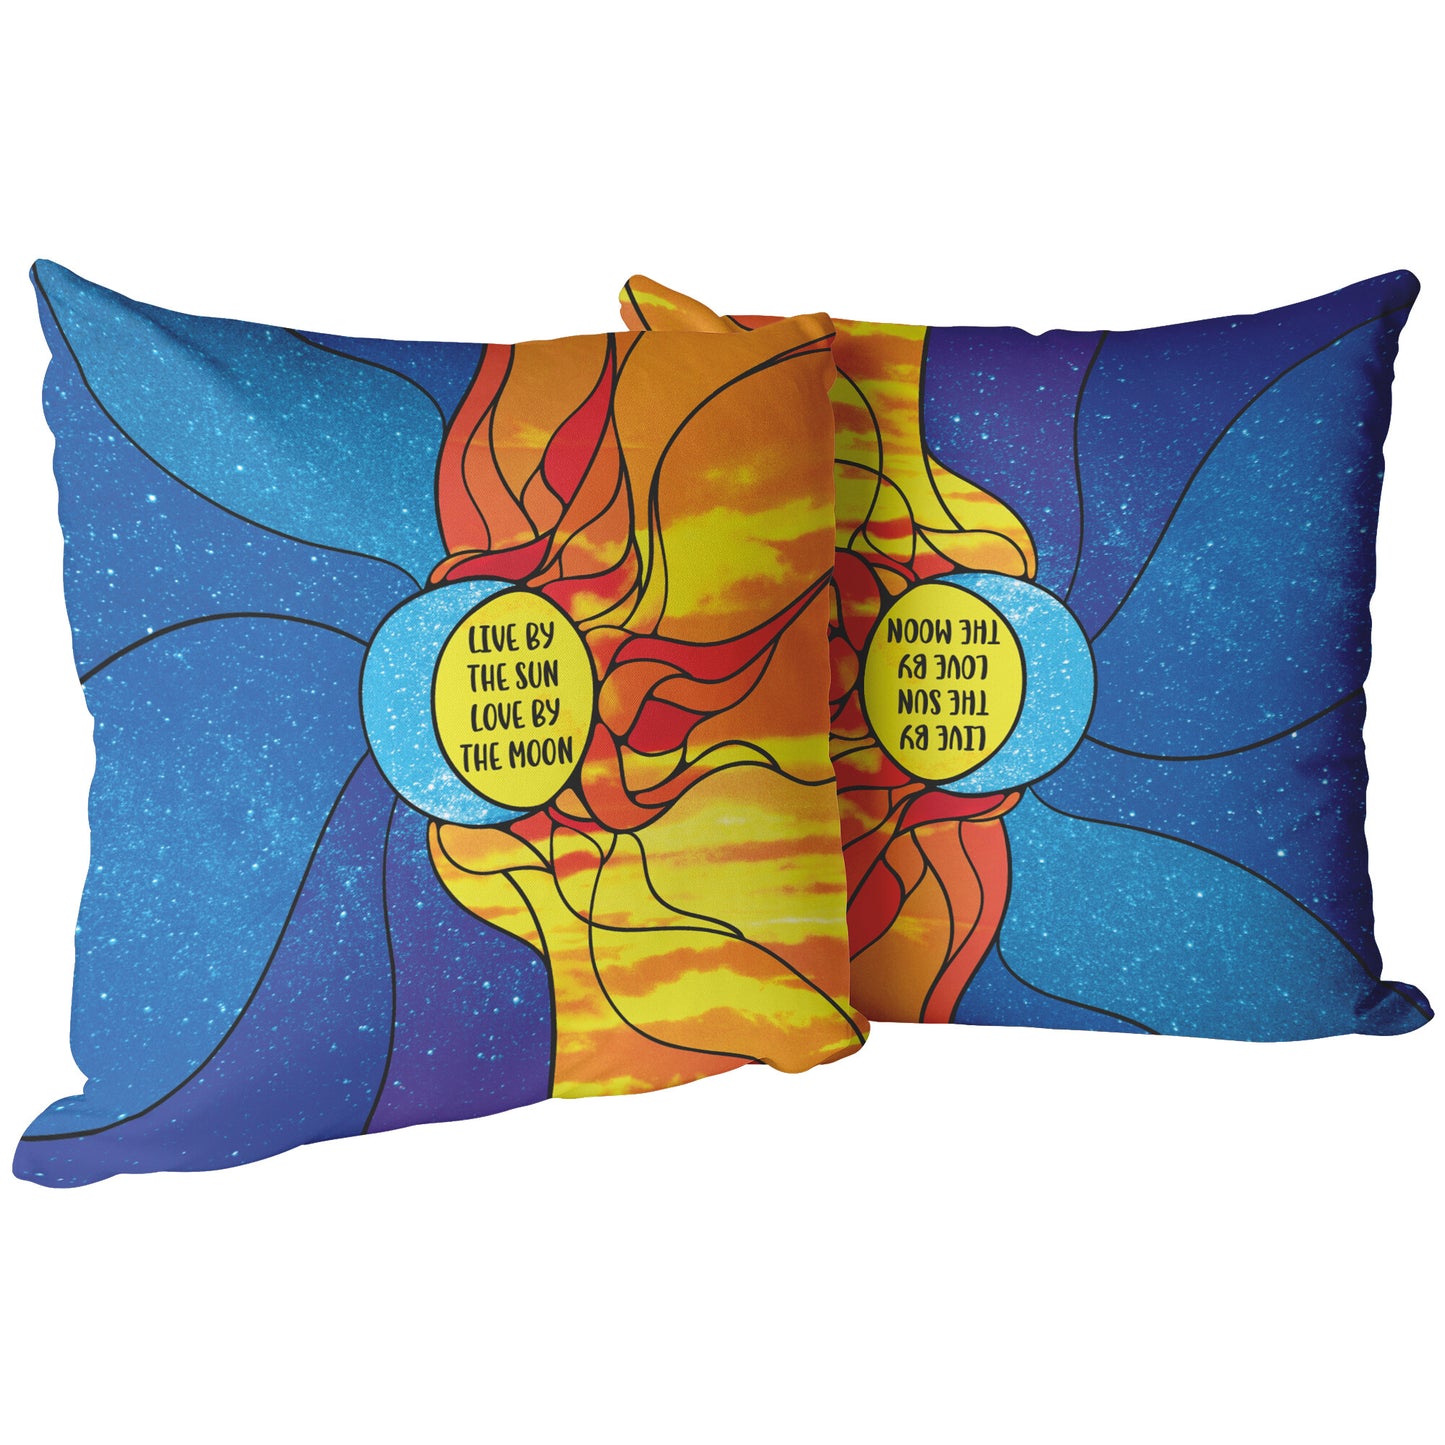 Live By The Sun Pillows And Covers